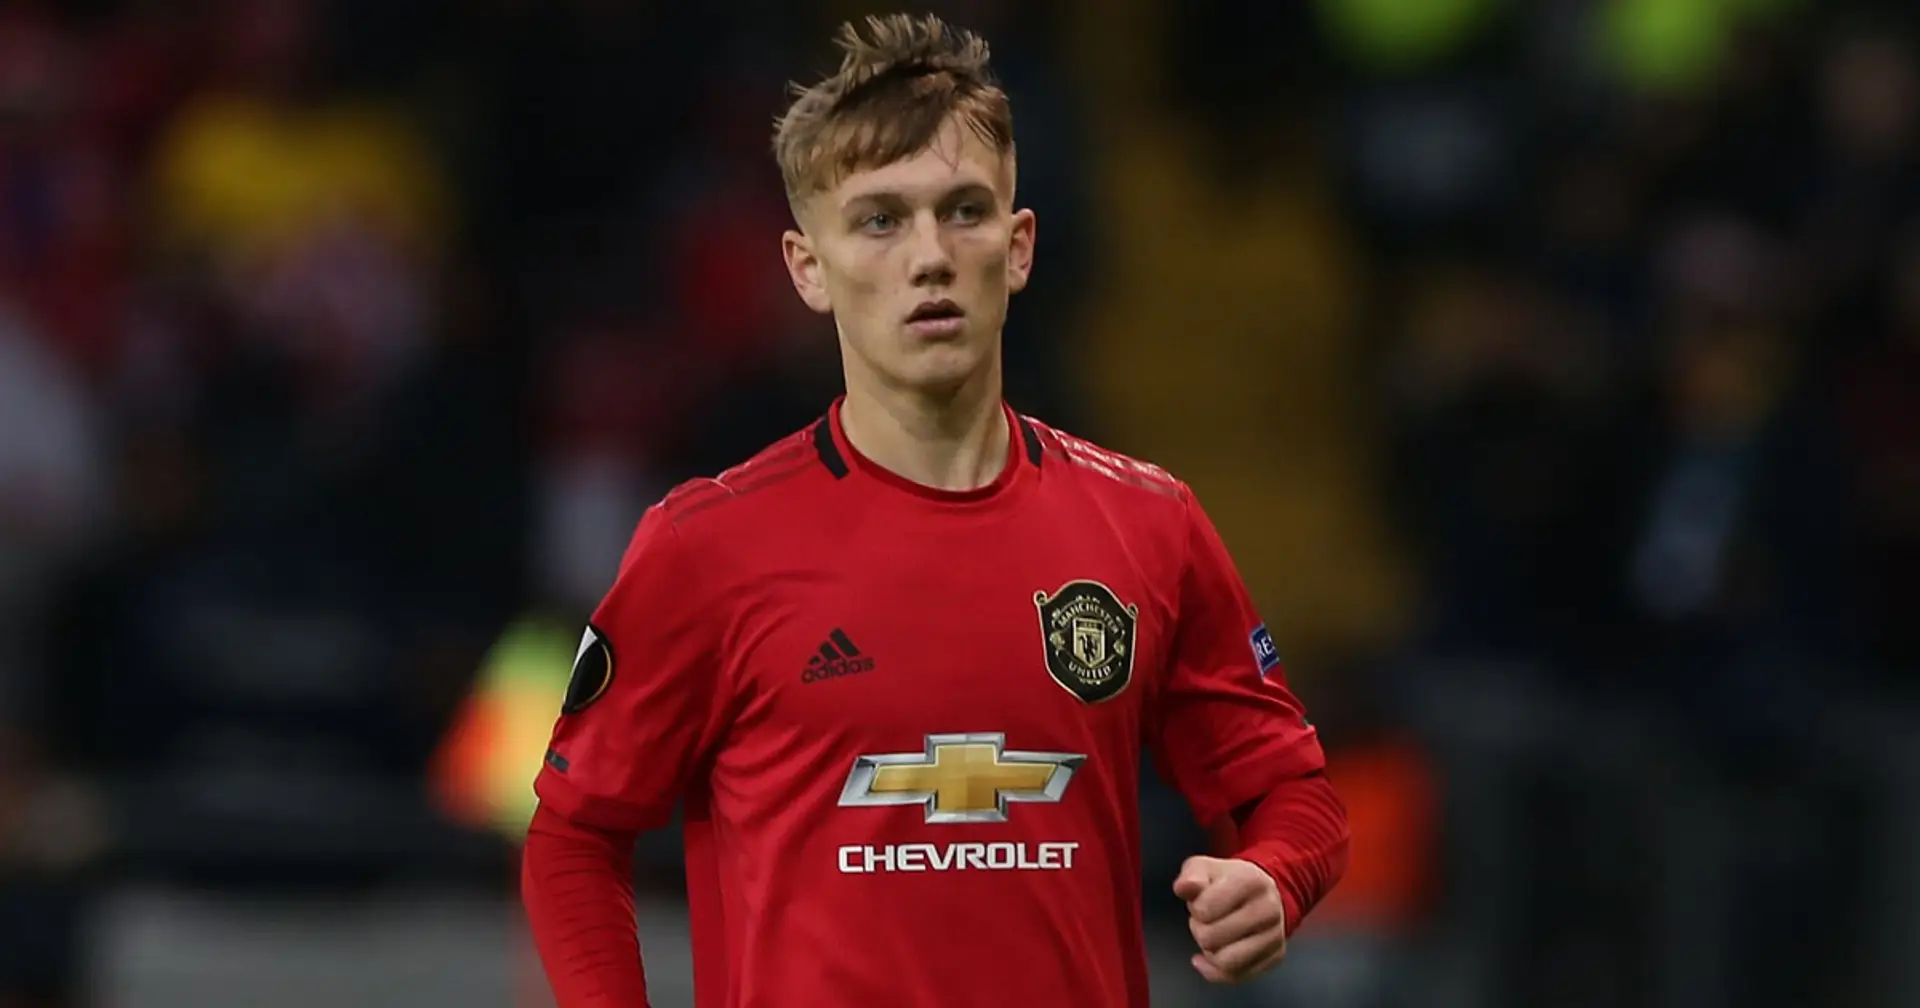 United's ‘best young player’ Galbraith promoted to Solskjaer’s first team during Europa League campaign